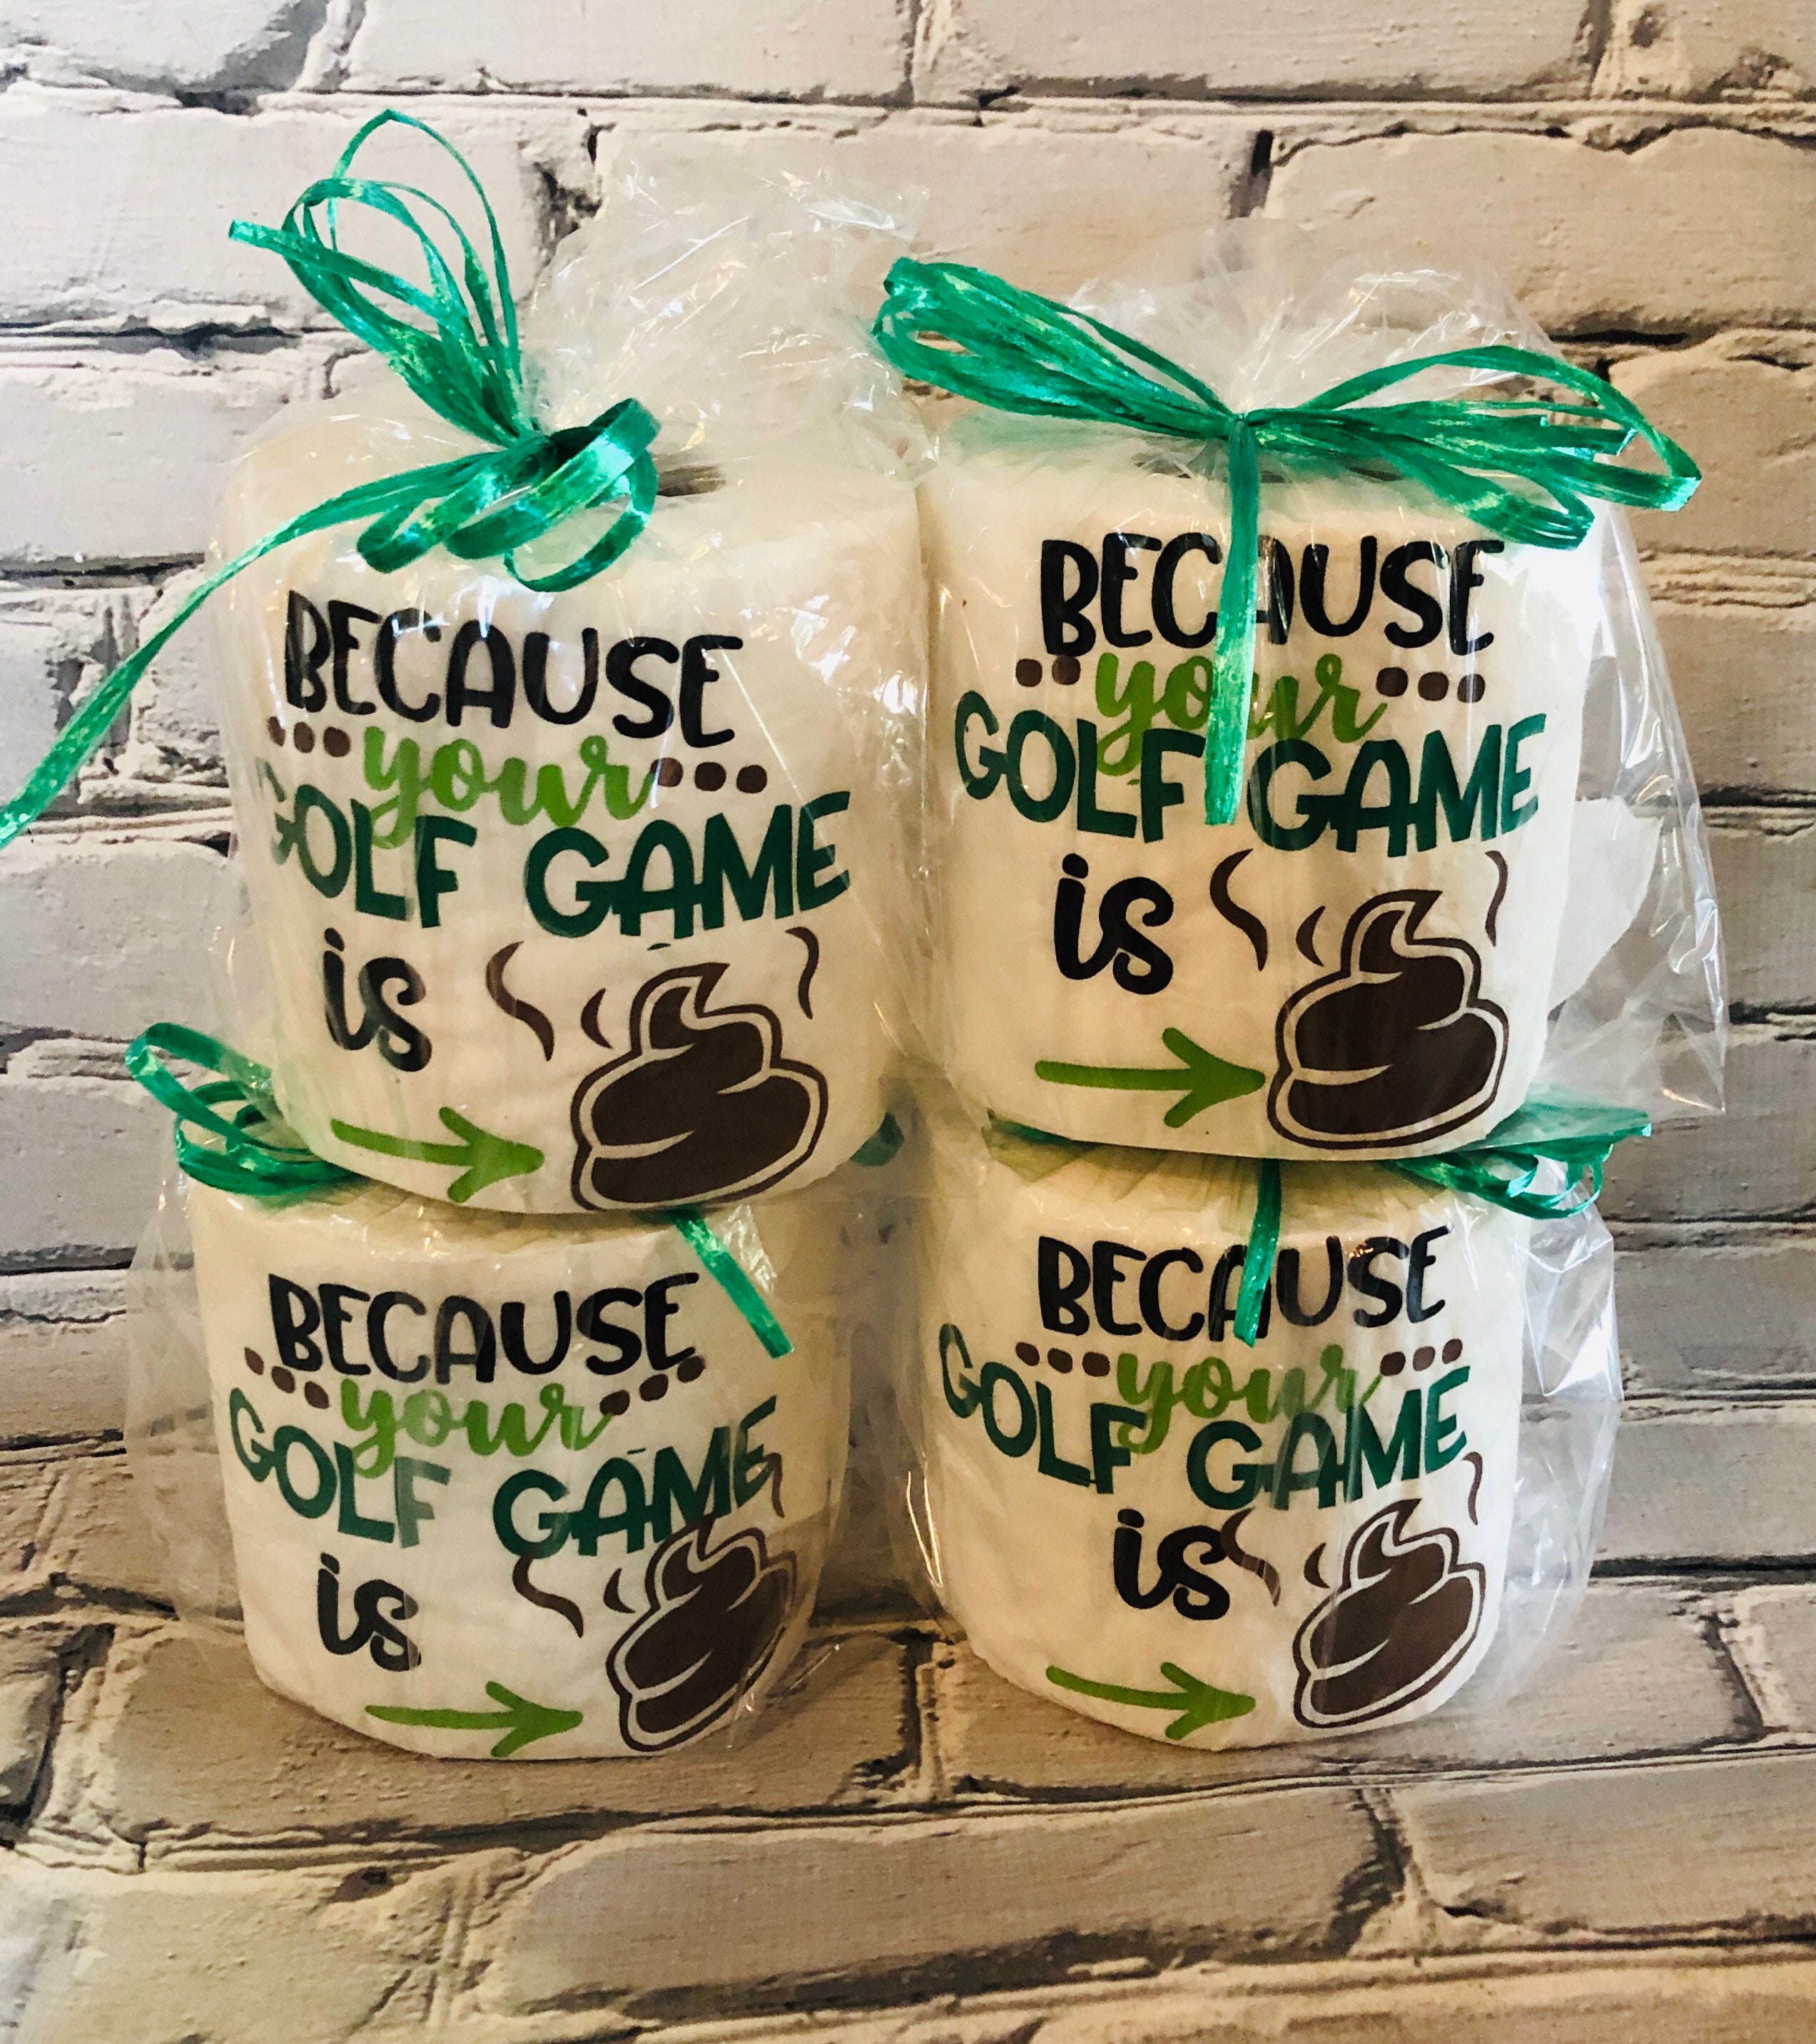 Because Your Golf Game is poop Embroidered Toilet Paper 